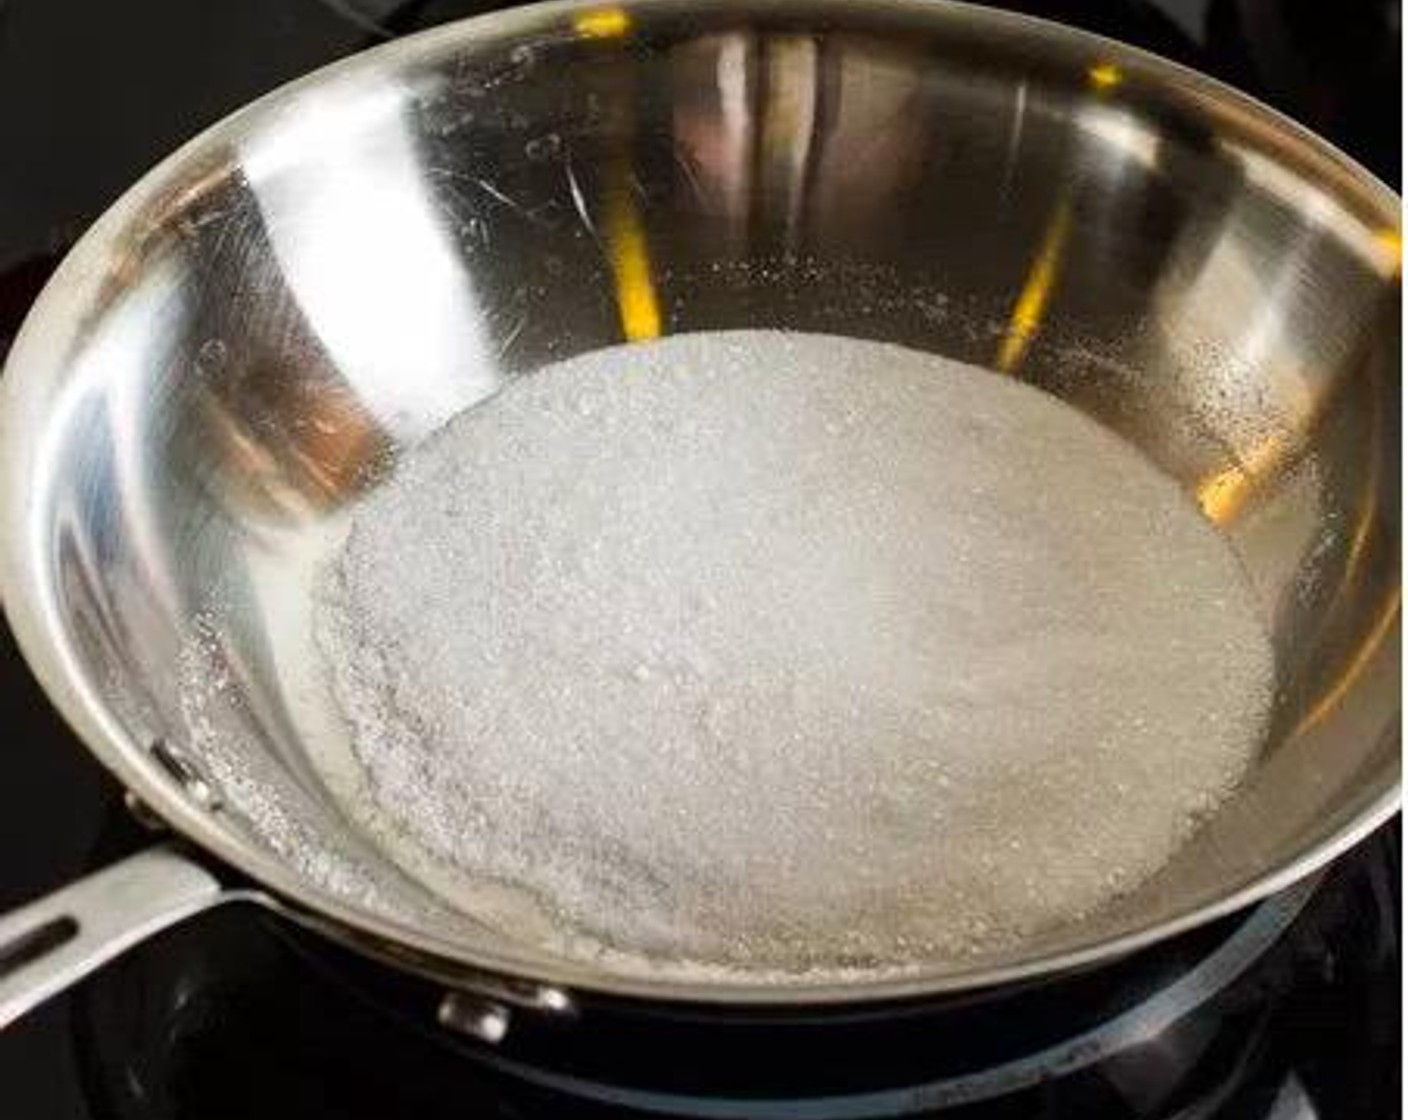 step 5 Pour the remaining 3 tablespoons of sugar in a small frying pan and set it over the medium-high heat. Allow the sugar to melt and caramelize. Use a heat-resistant silicone spatula to gently stir the caramel.